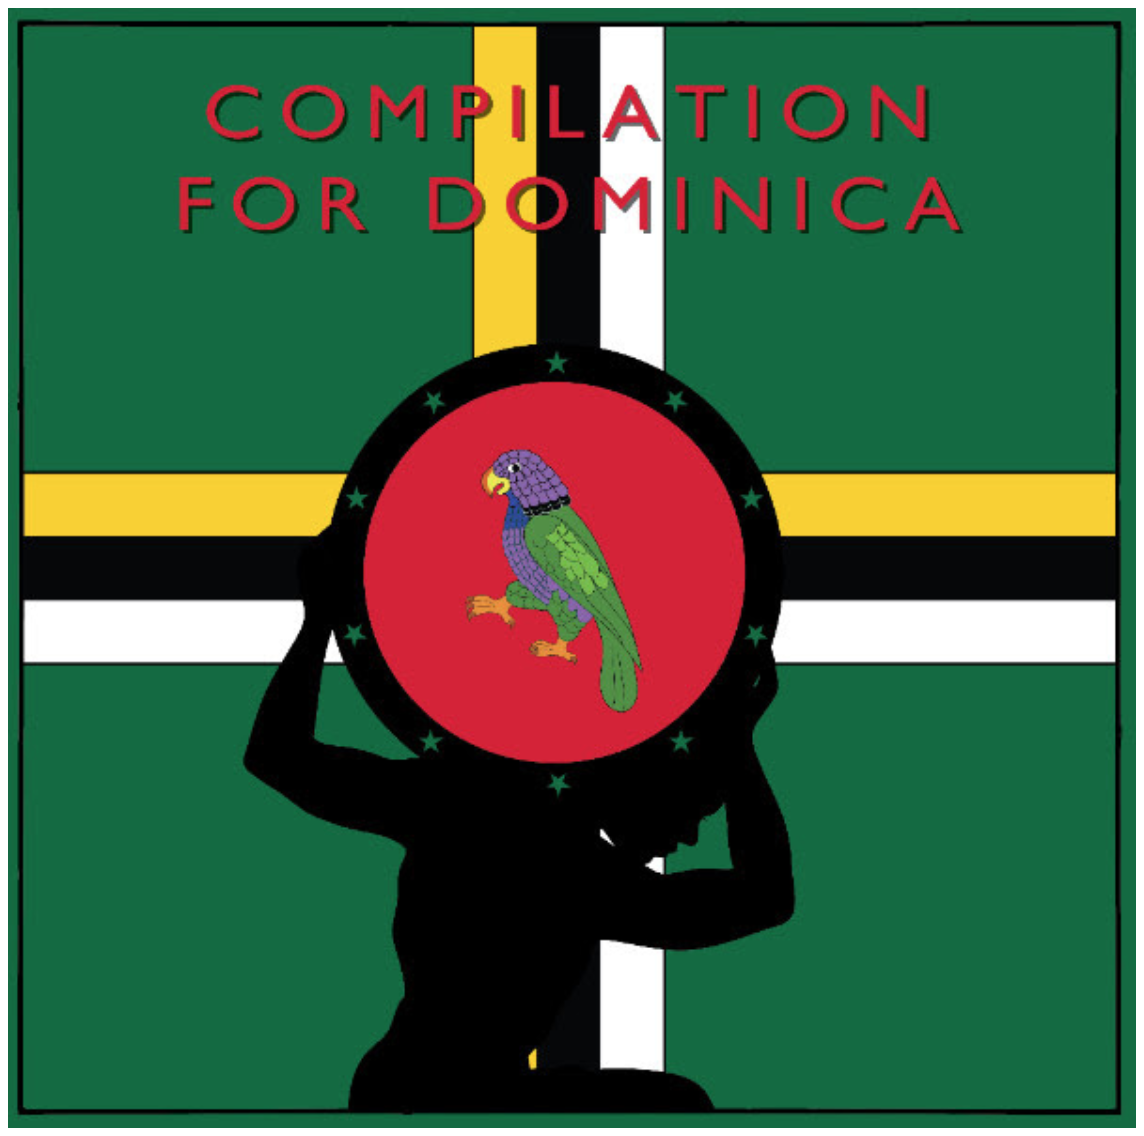 Compilation For Dominica, Rhythm Section, Bradley Zero, Glowing Palms 